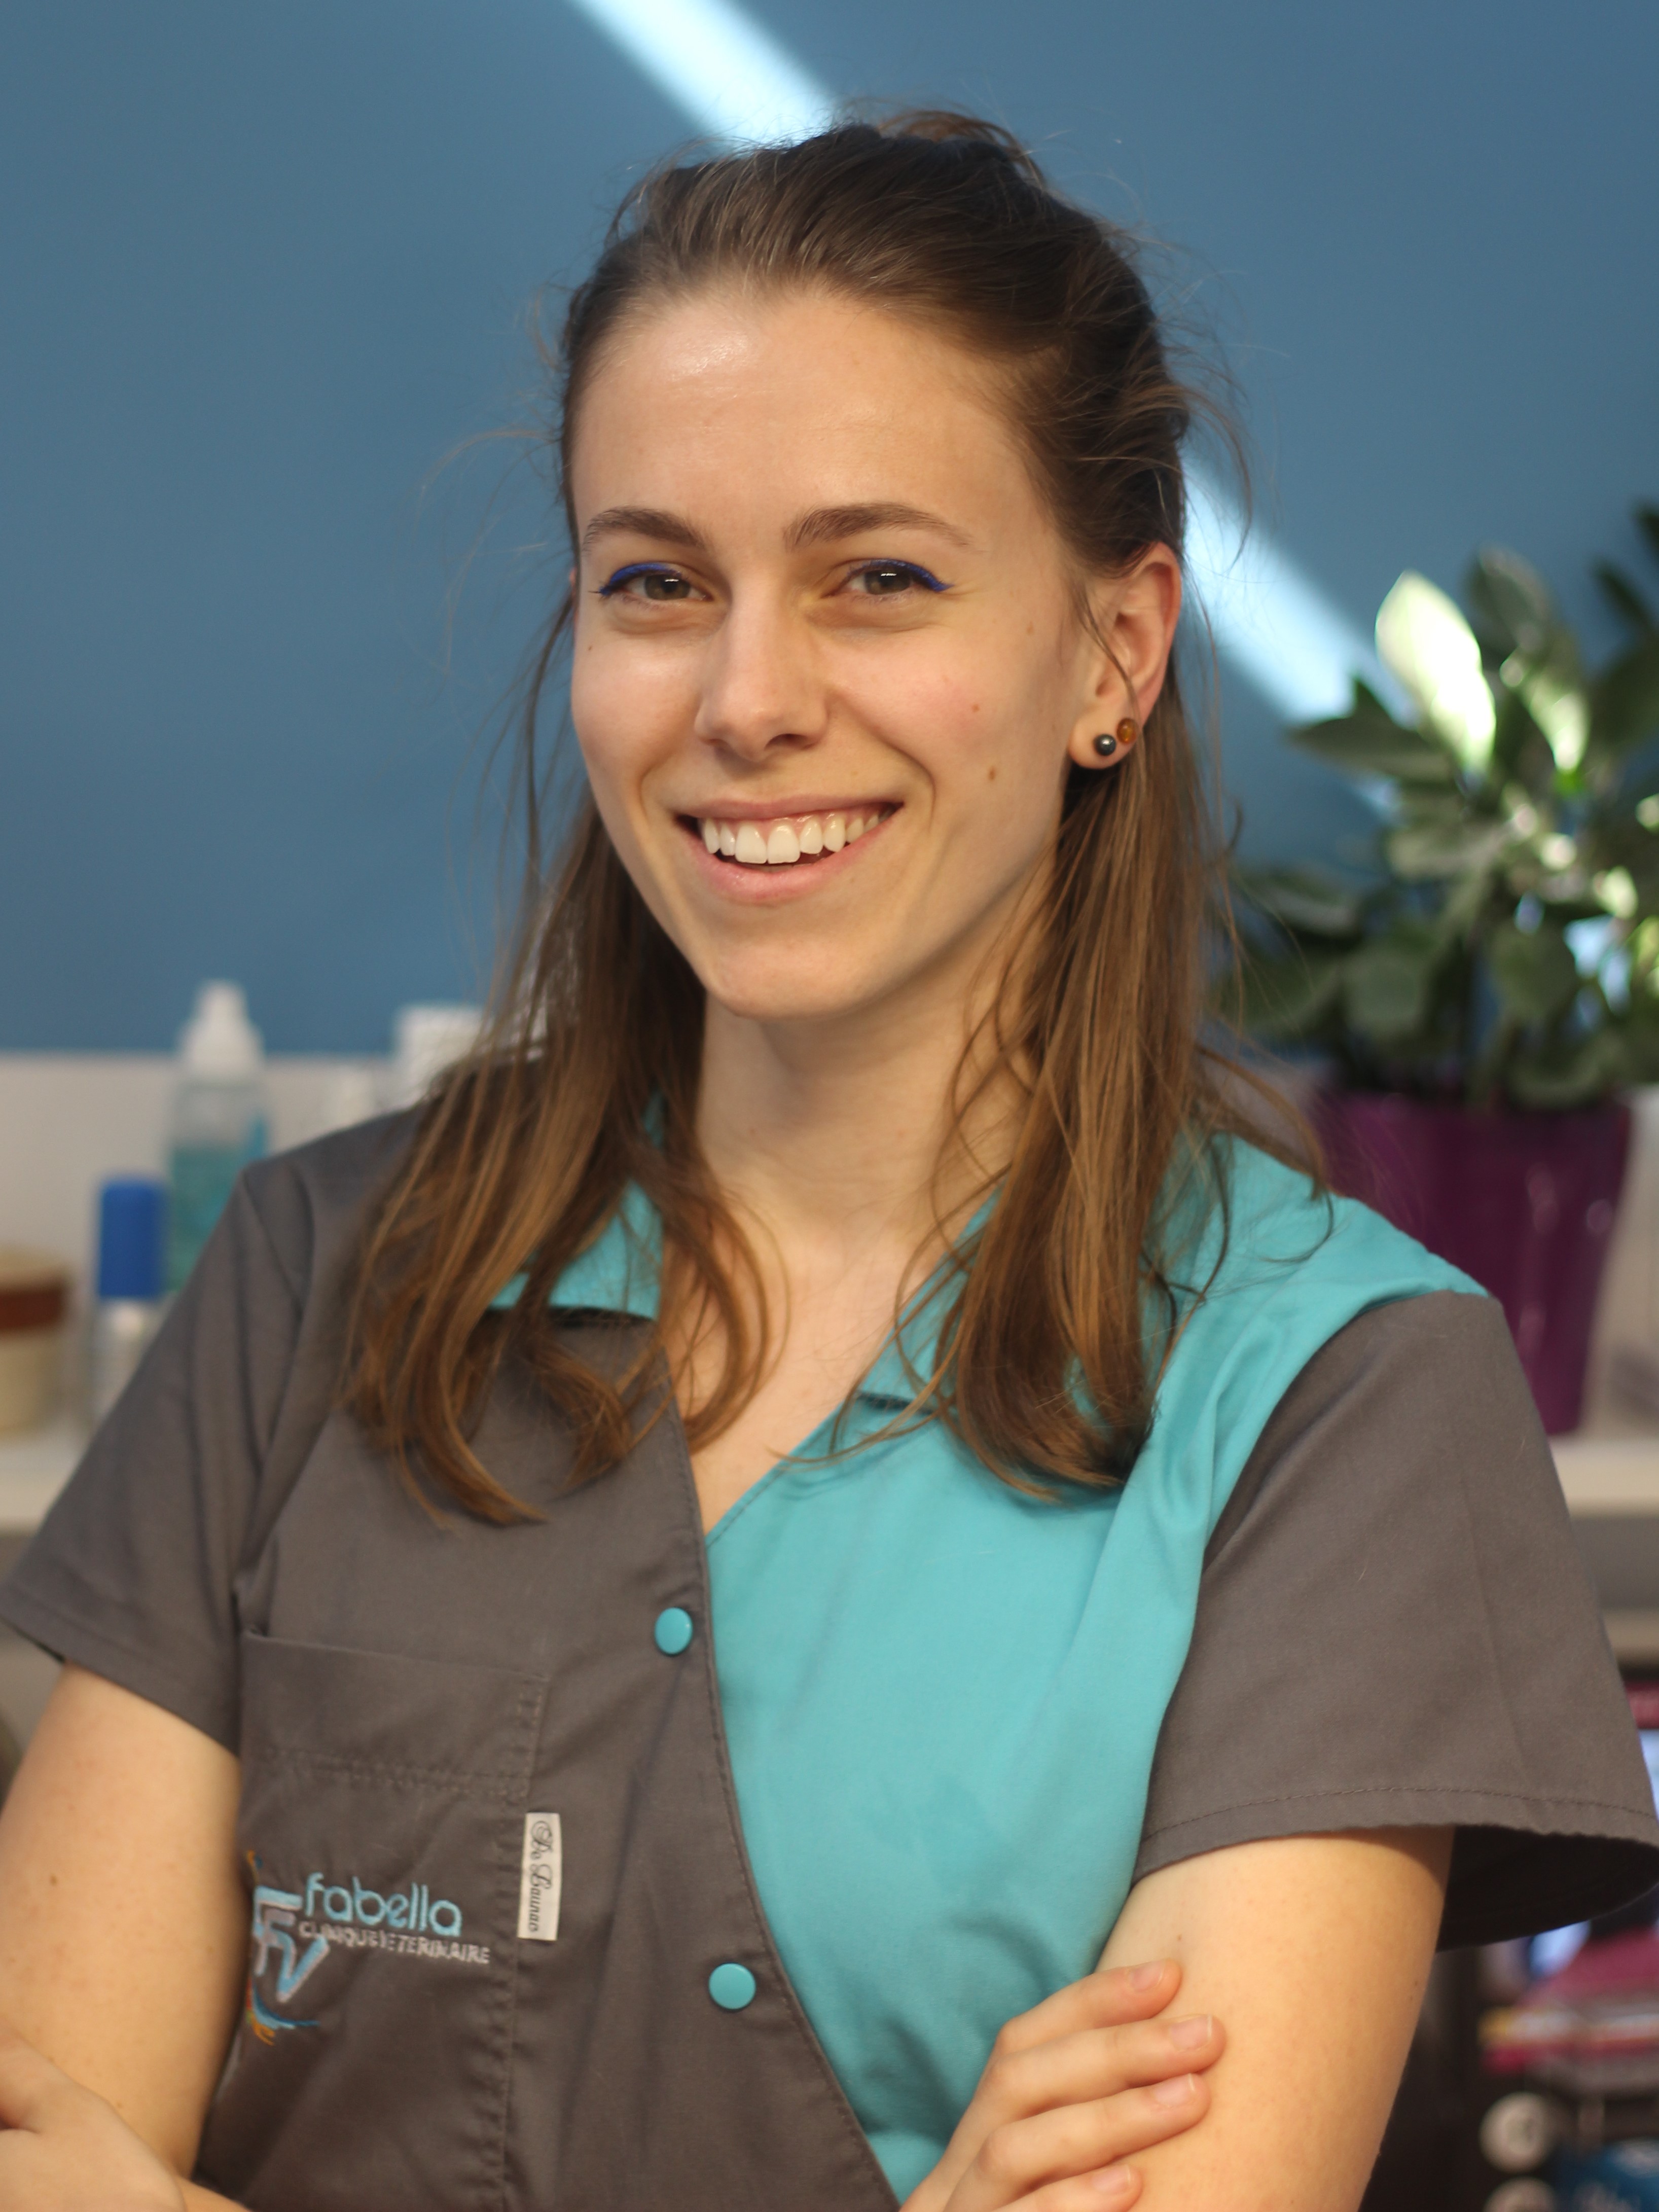 clinique veterinaire fabella Dr Morgane Weissner